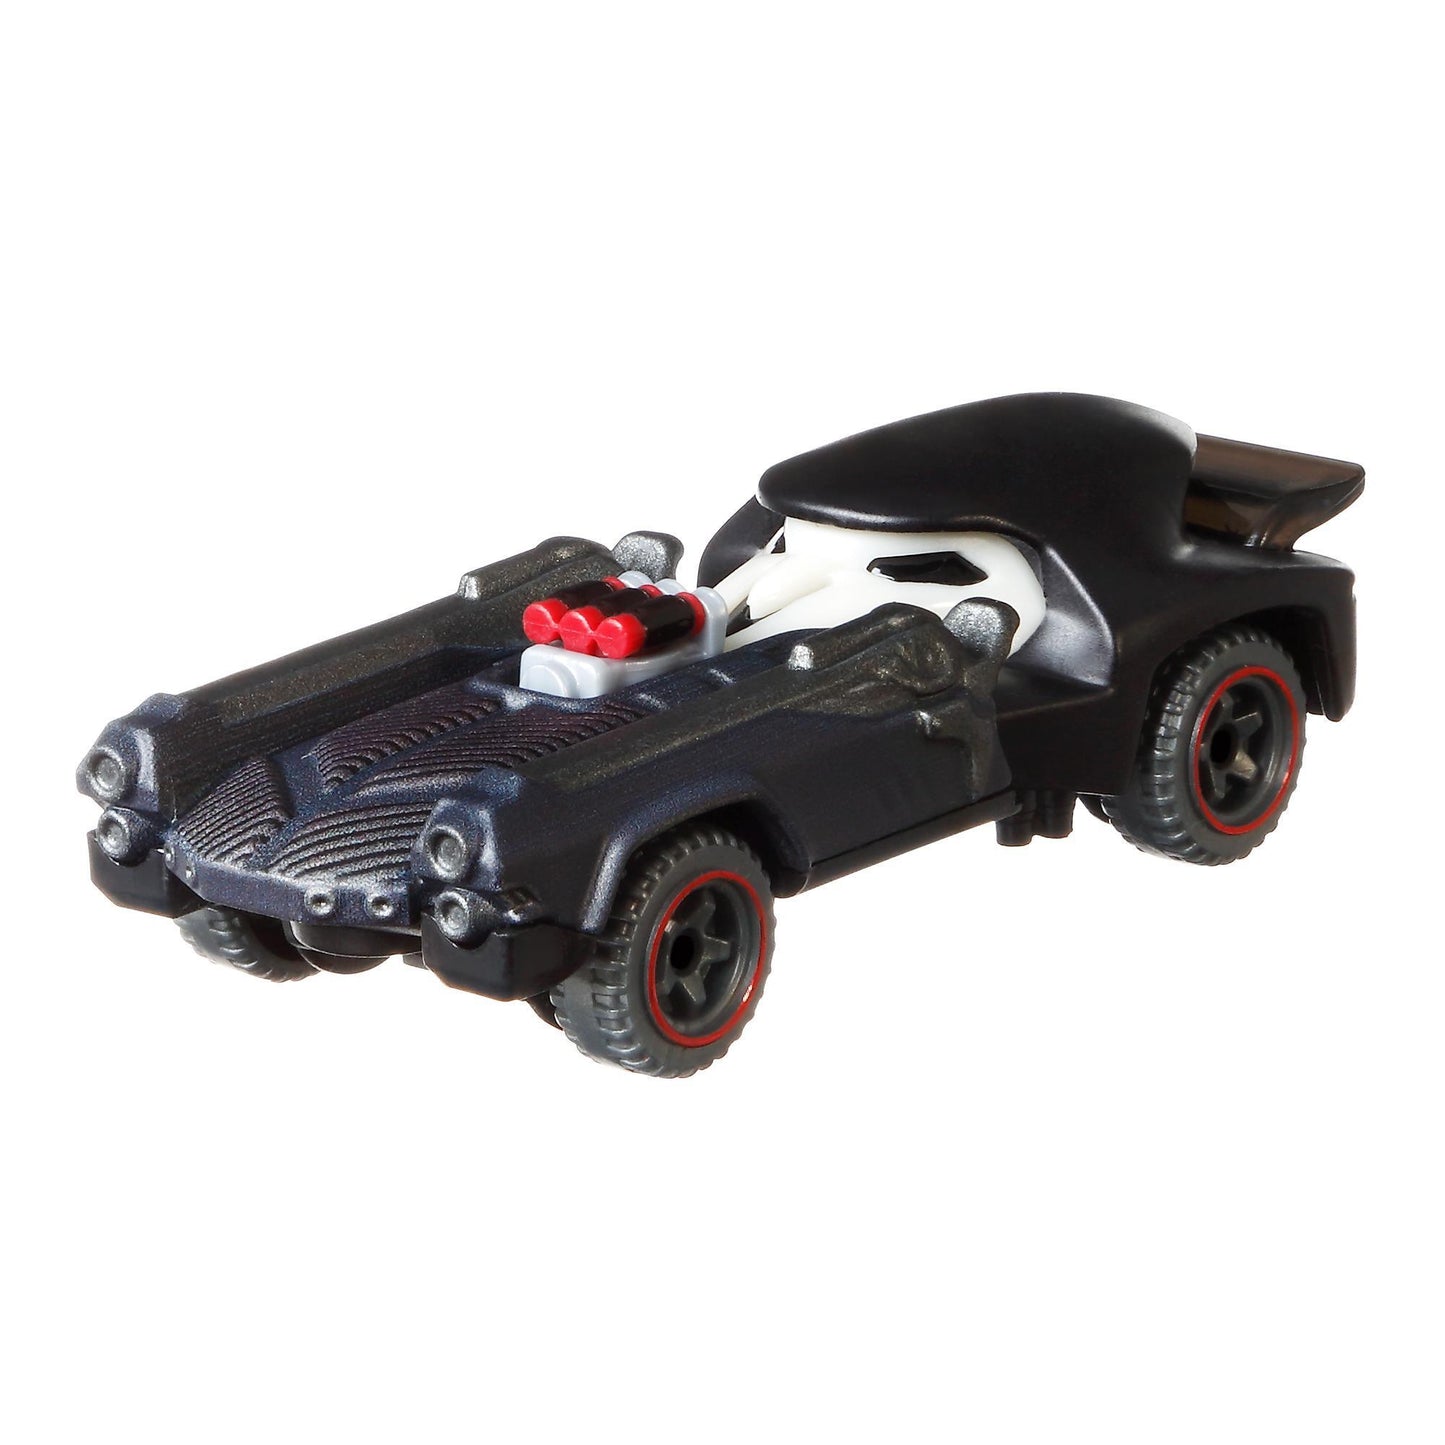 Hot Wheels Video Game Cars - Reaper Overwatch Character - Black - 1:64 Scale